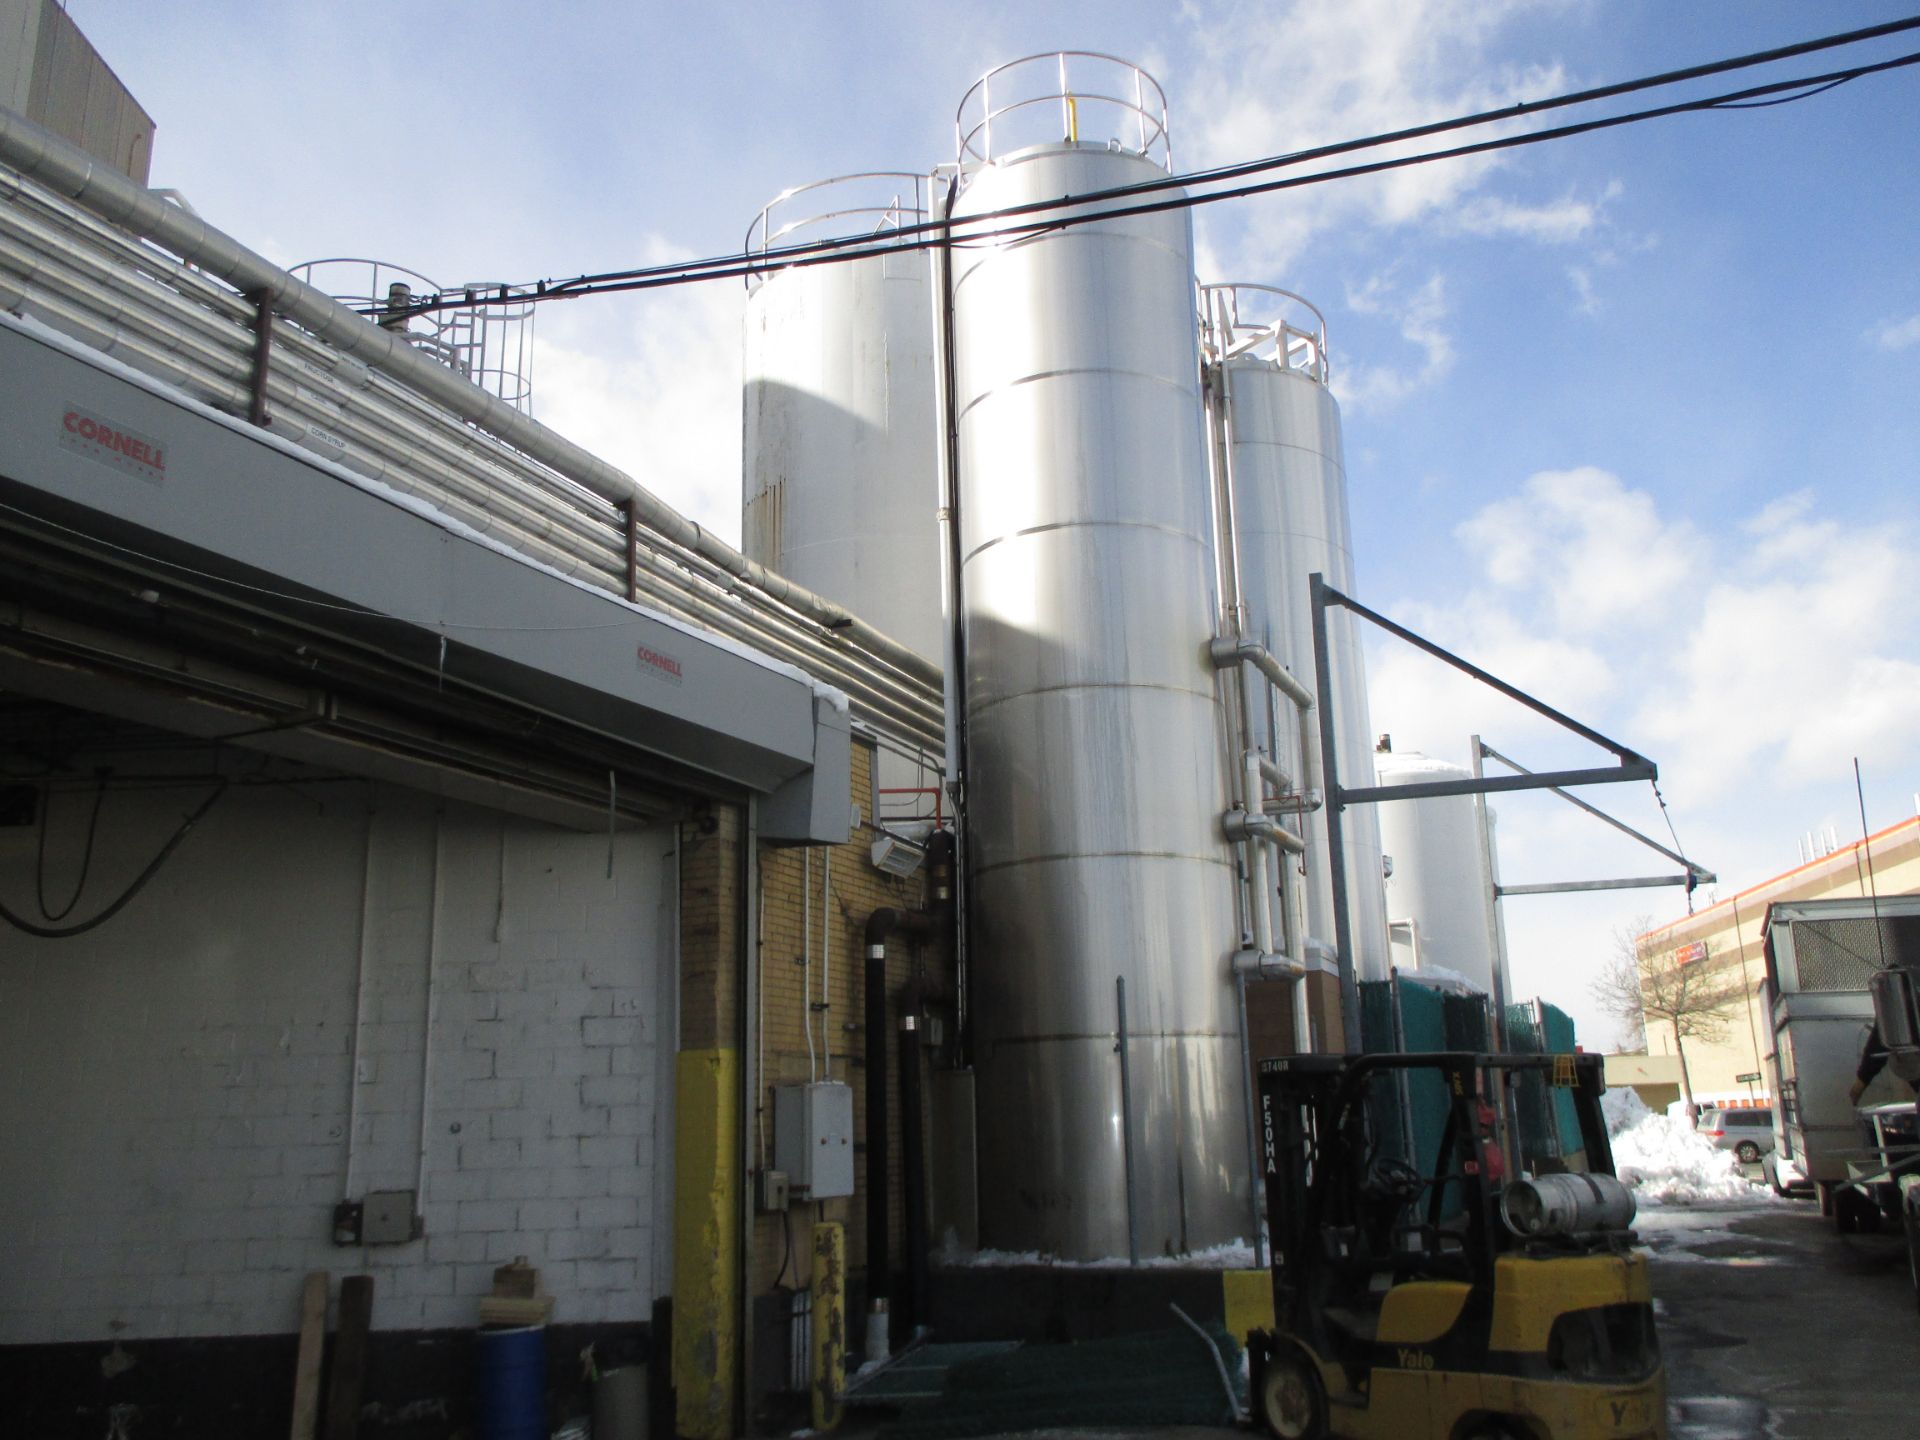 Cherry Burrell 10,000 Gal. Refrigerated Silo, with S/S Exterior, Vertical Agitation, Hydraulic Motor